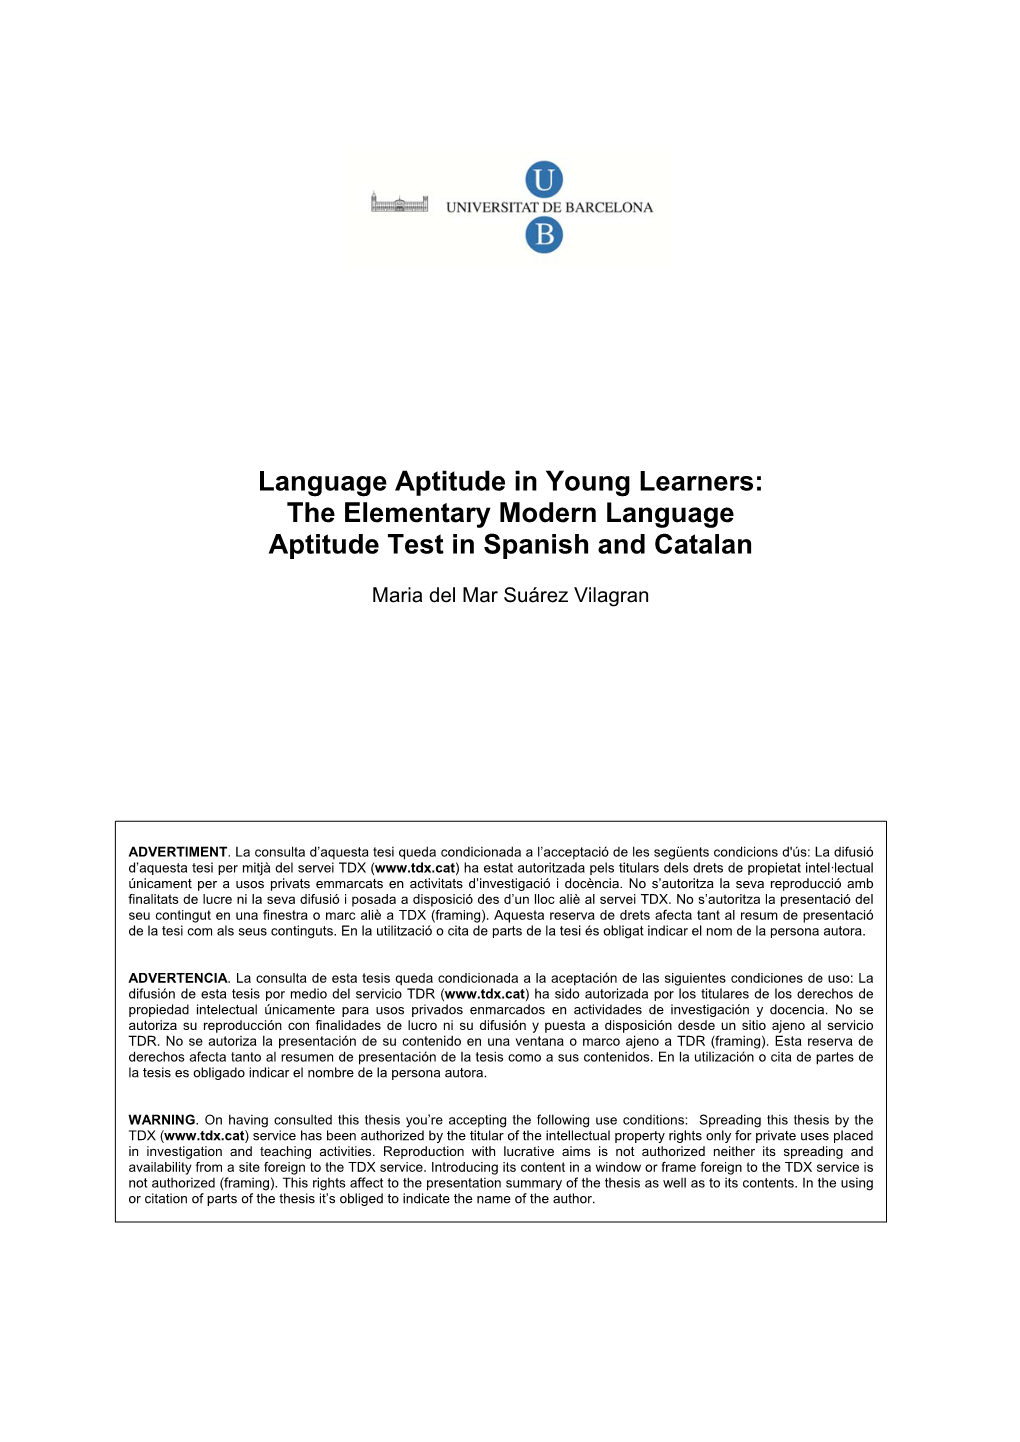 Language Aptitude in Young Learners: the Elementary Modern Language Aptitude Test in Spanish and Catalan